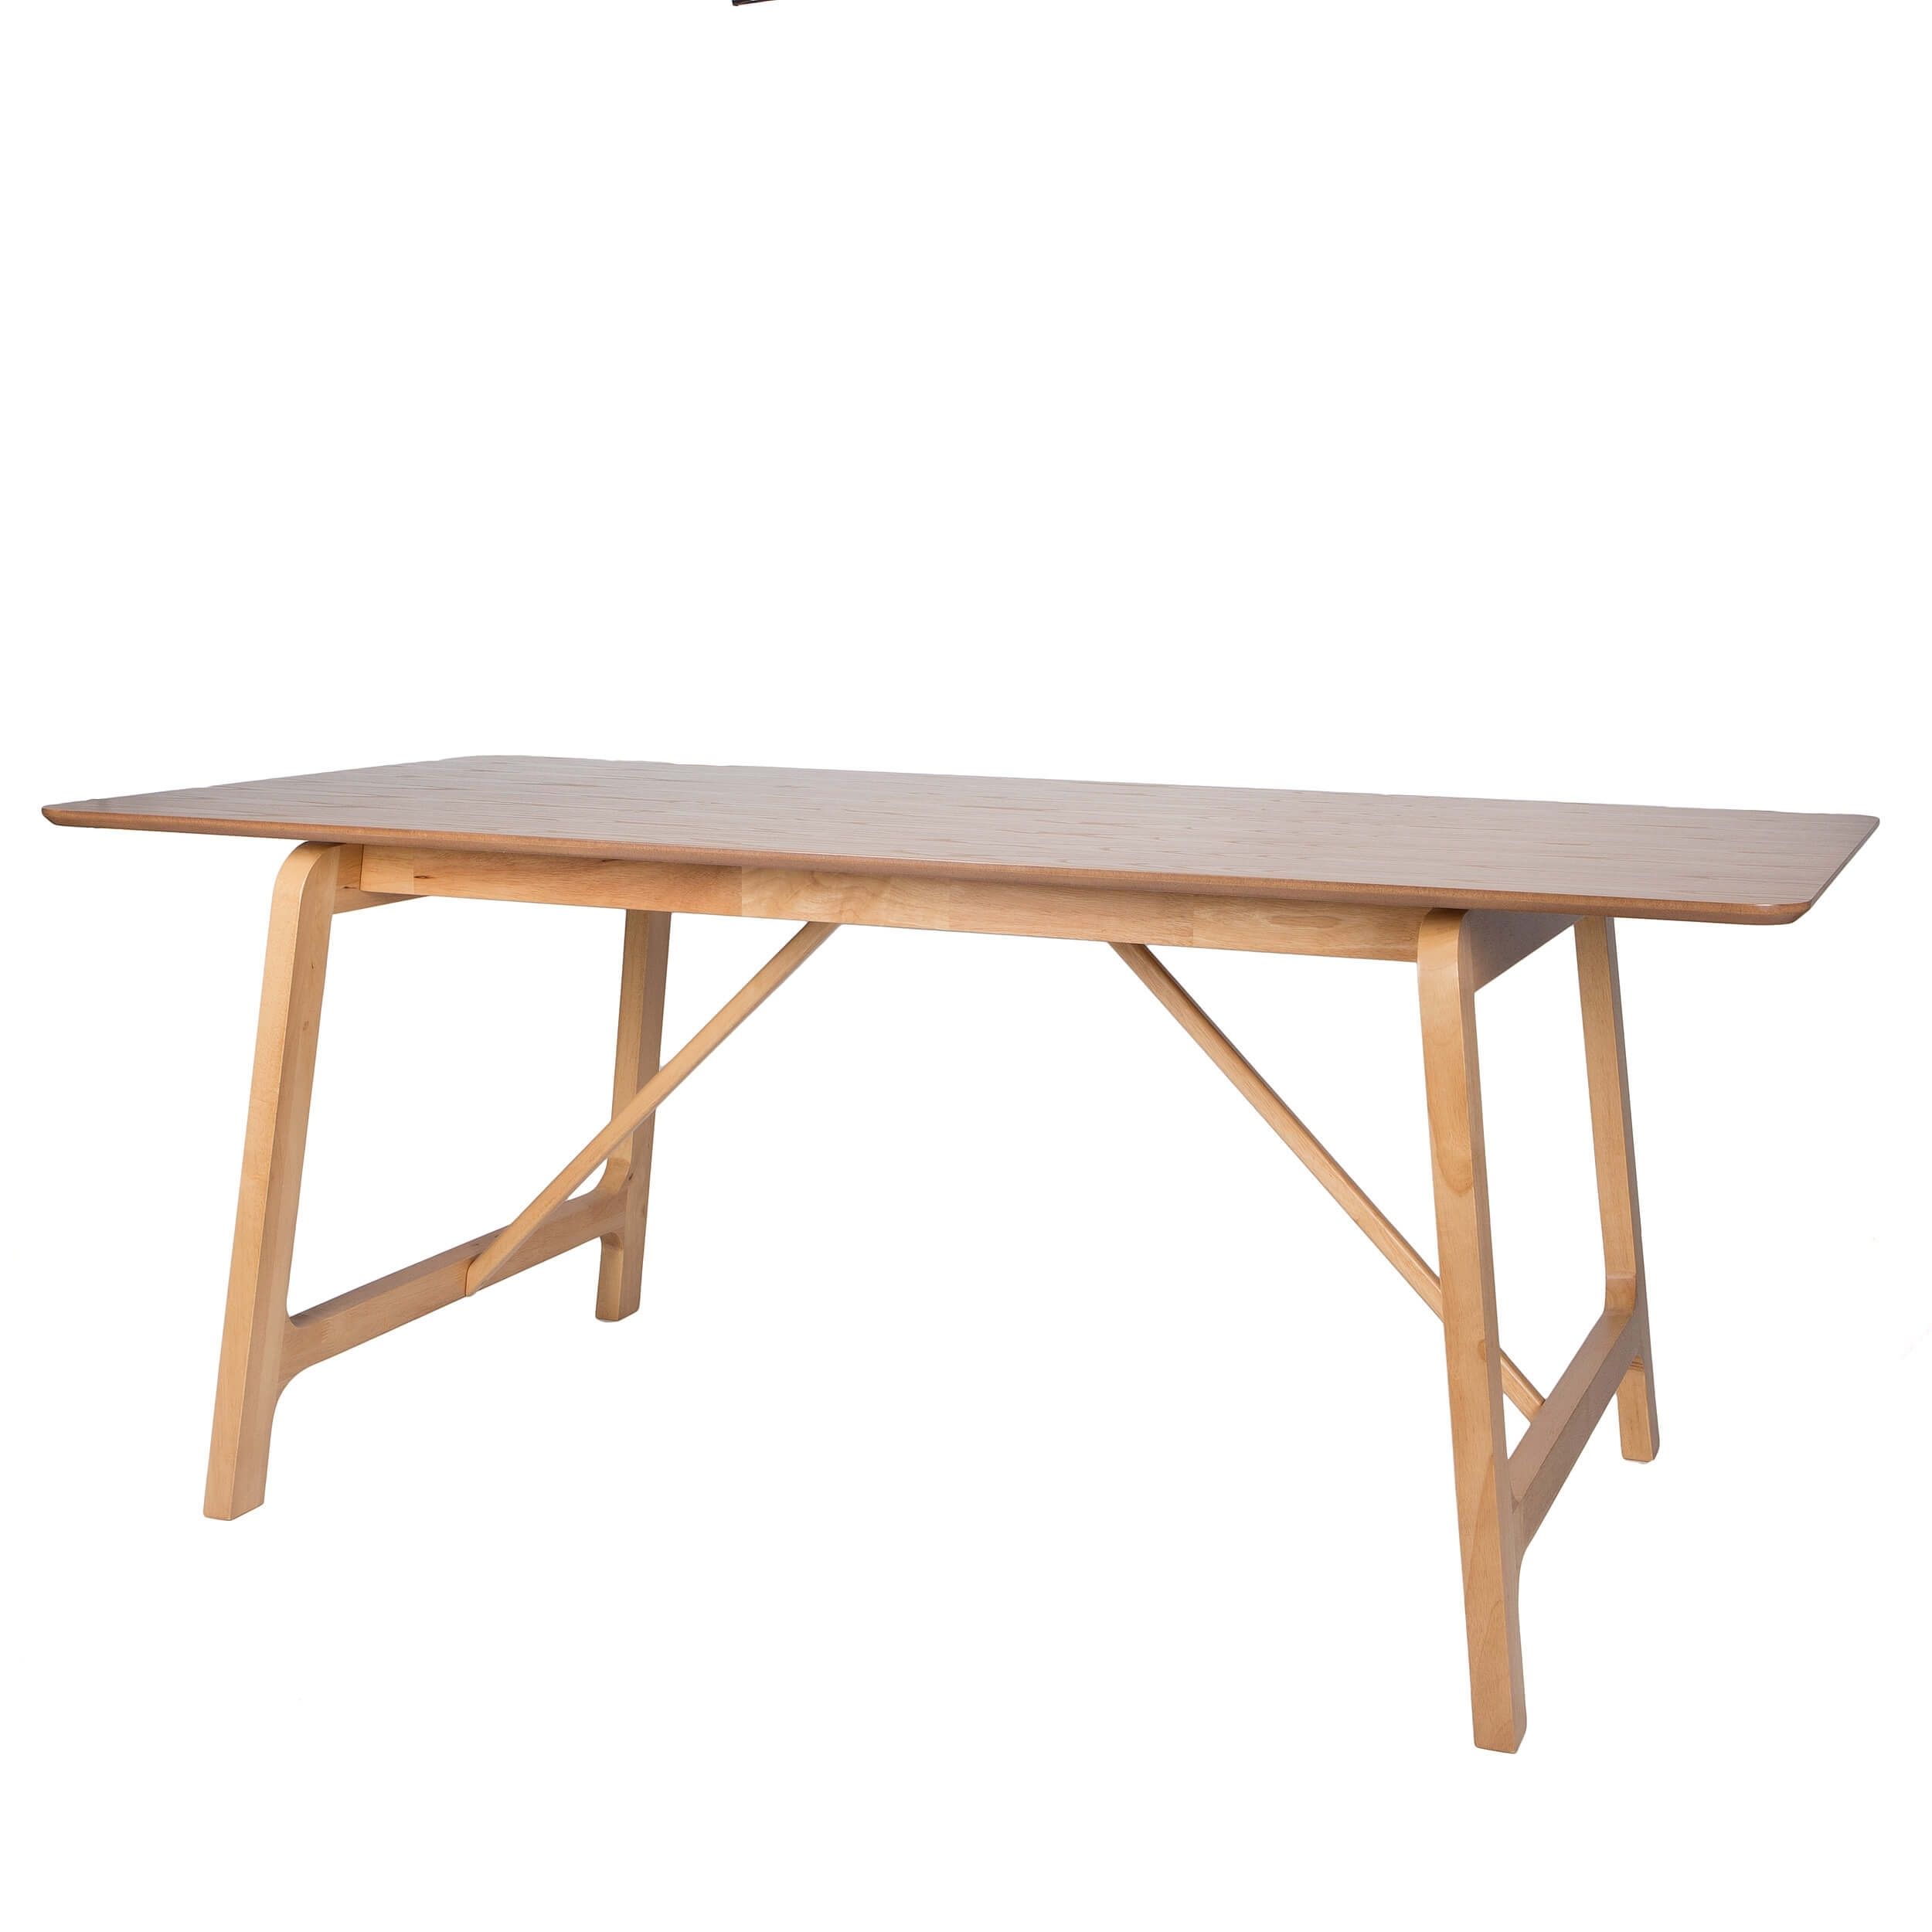 Trestle Dining Table In Warm Oak – Seats 6 – Sienna Throughout Most Popular Outdoor Sienna Dining Tables (View 14 of 20)